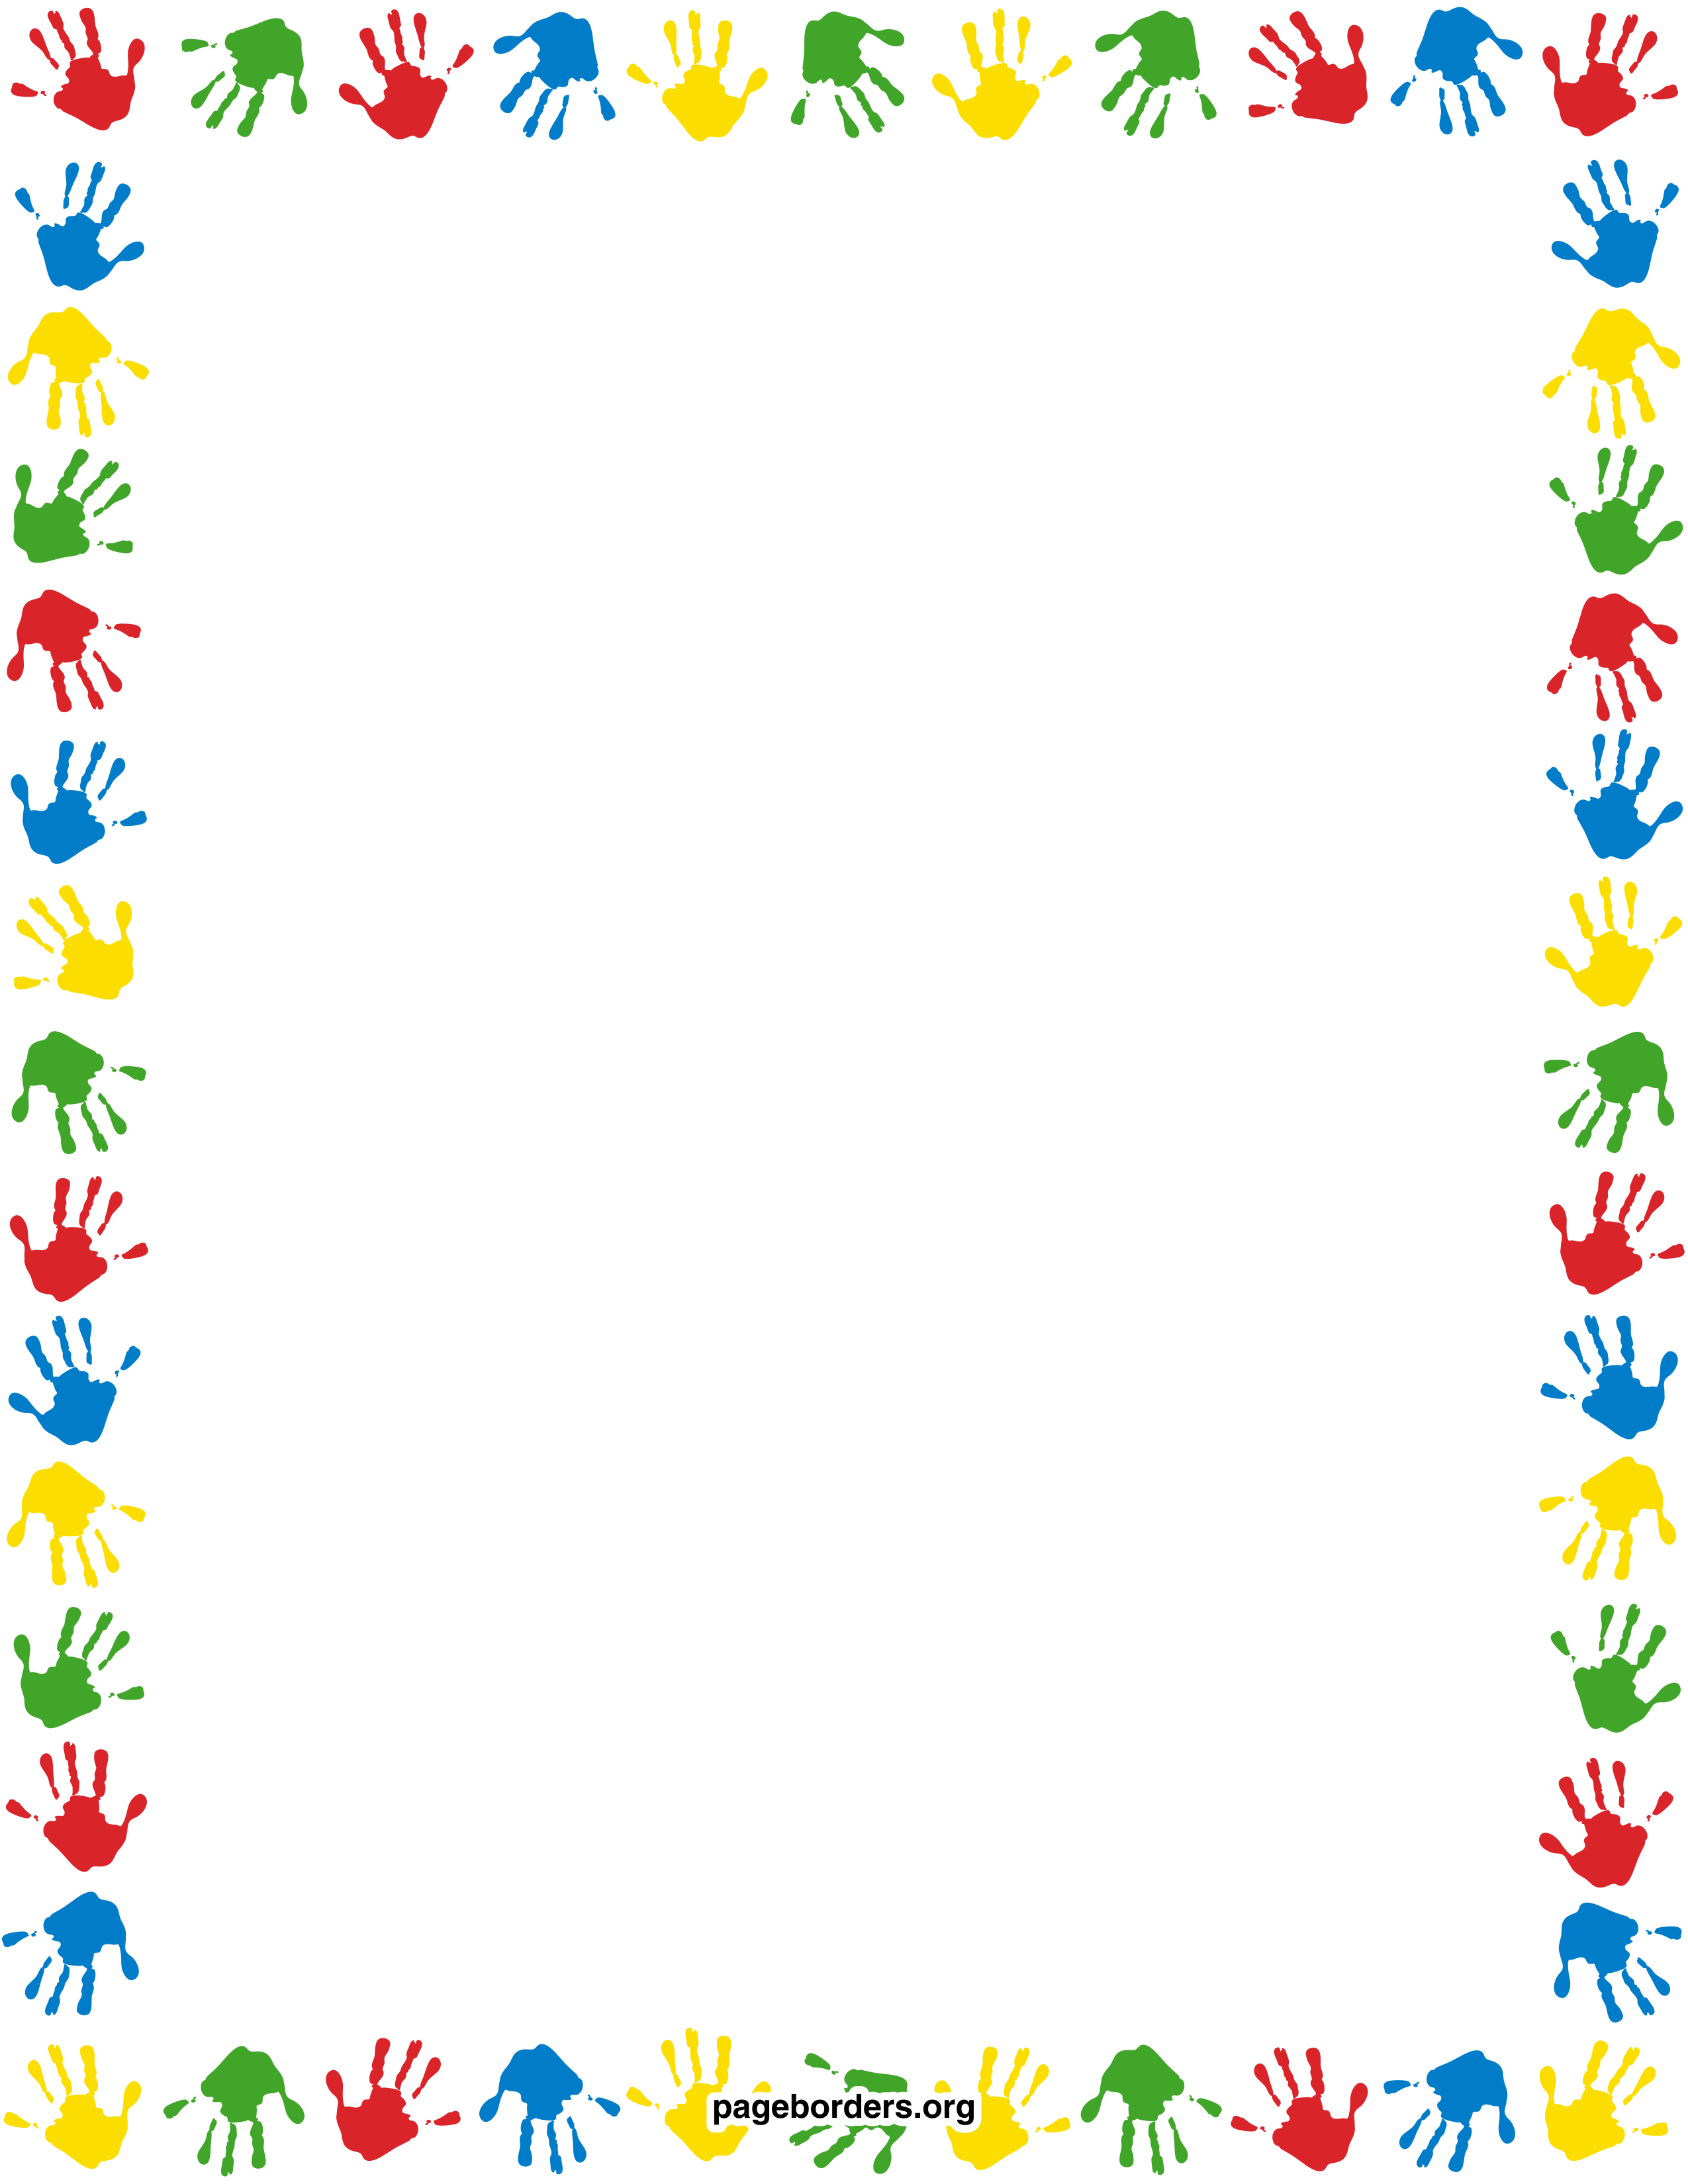 Handprint Page Border | Hot Sex Picture